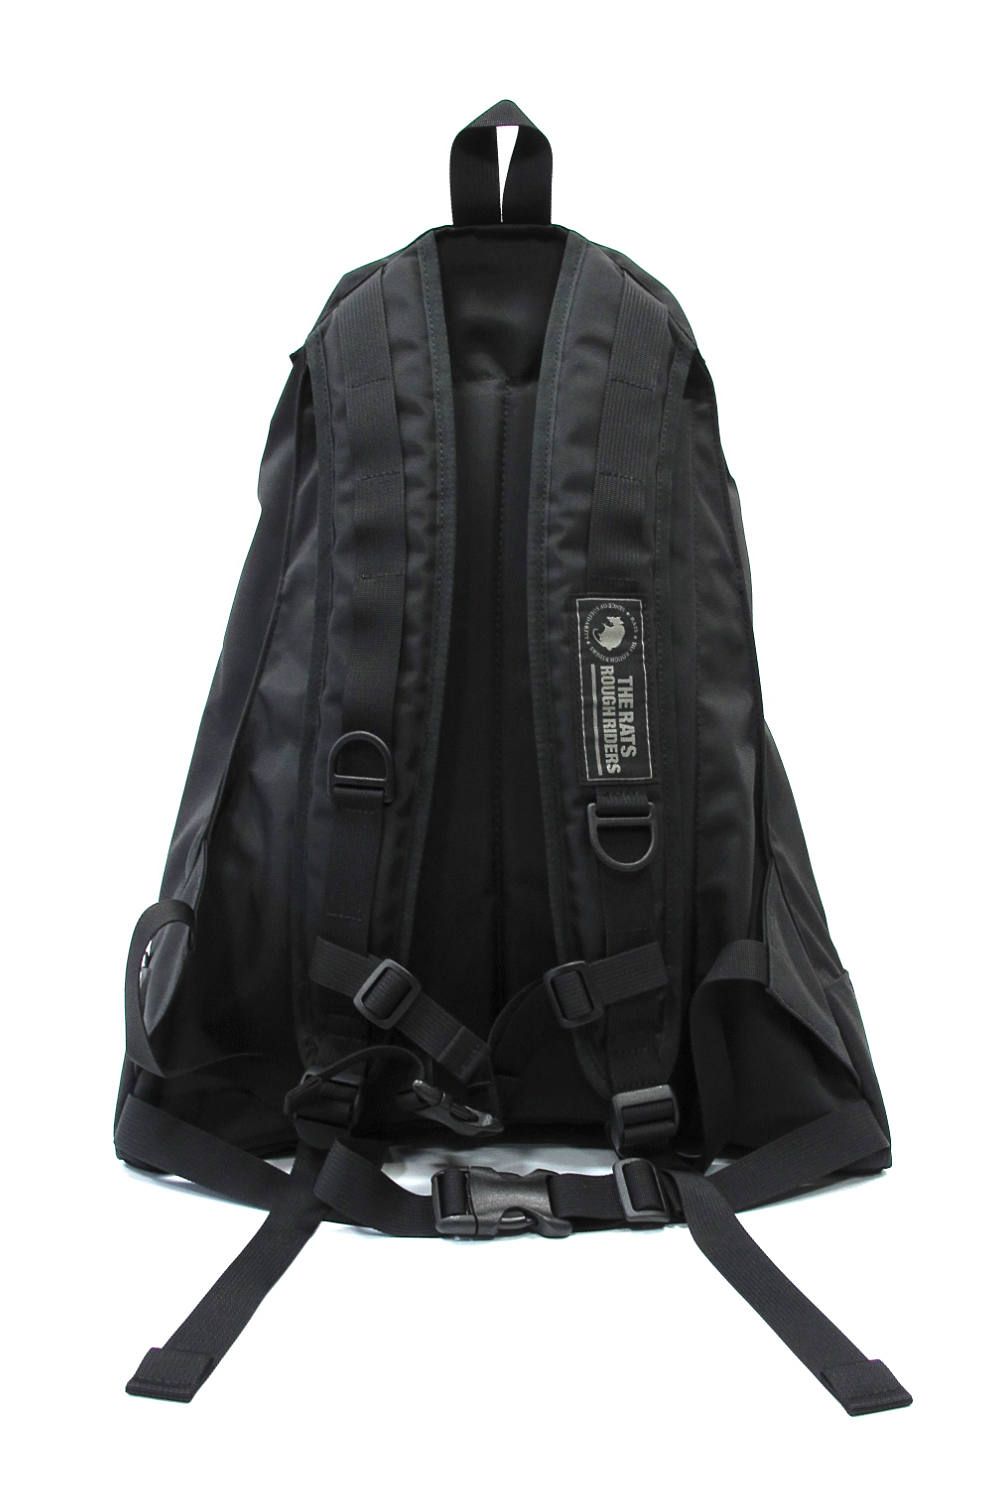 RATS - DAY PACK collaboration with PORTER (BLACK) / ポーター